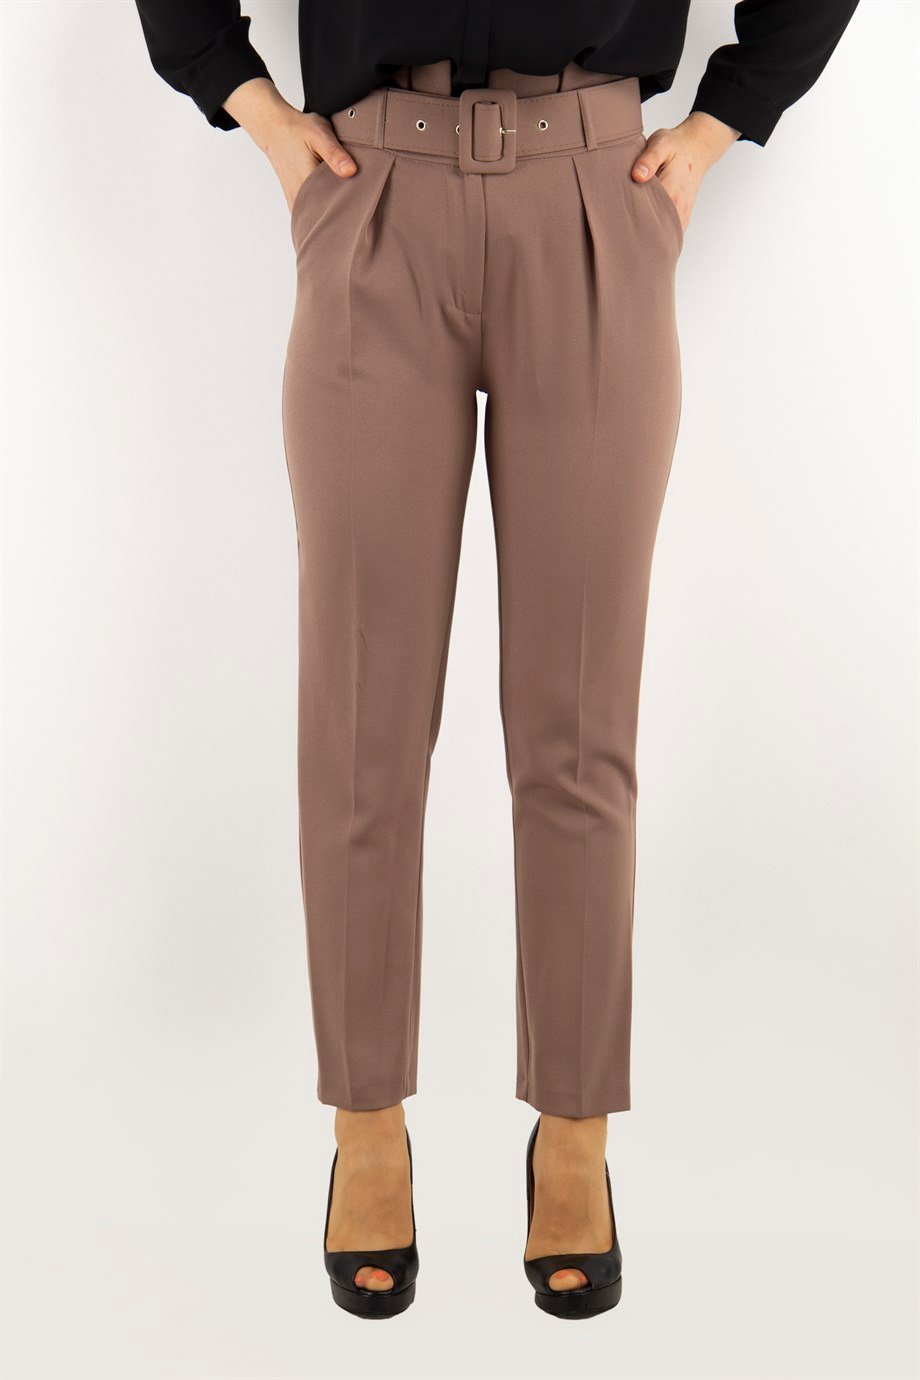 Trousers With Matching Belt Casual Formal Office Pants For Ladies - Saxe -  Wholesale Womens Clothing Vendors For Boutiques